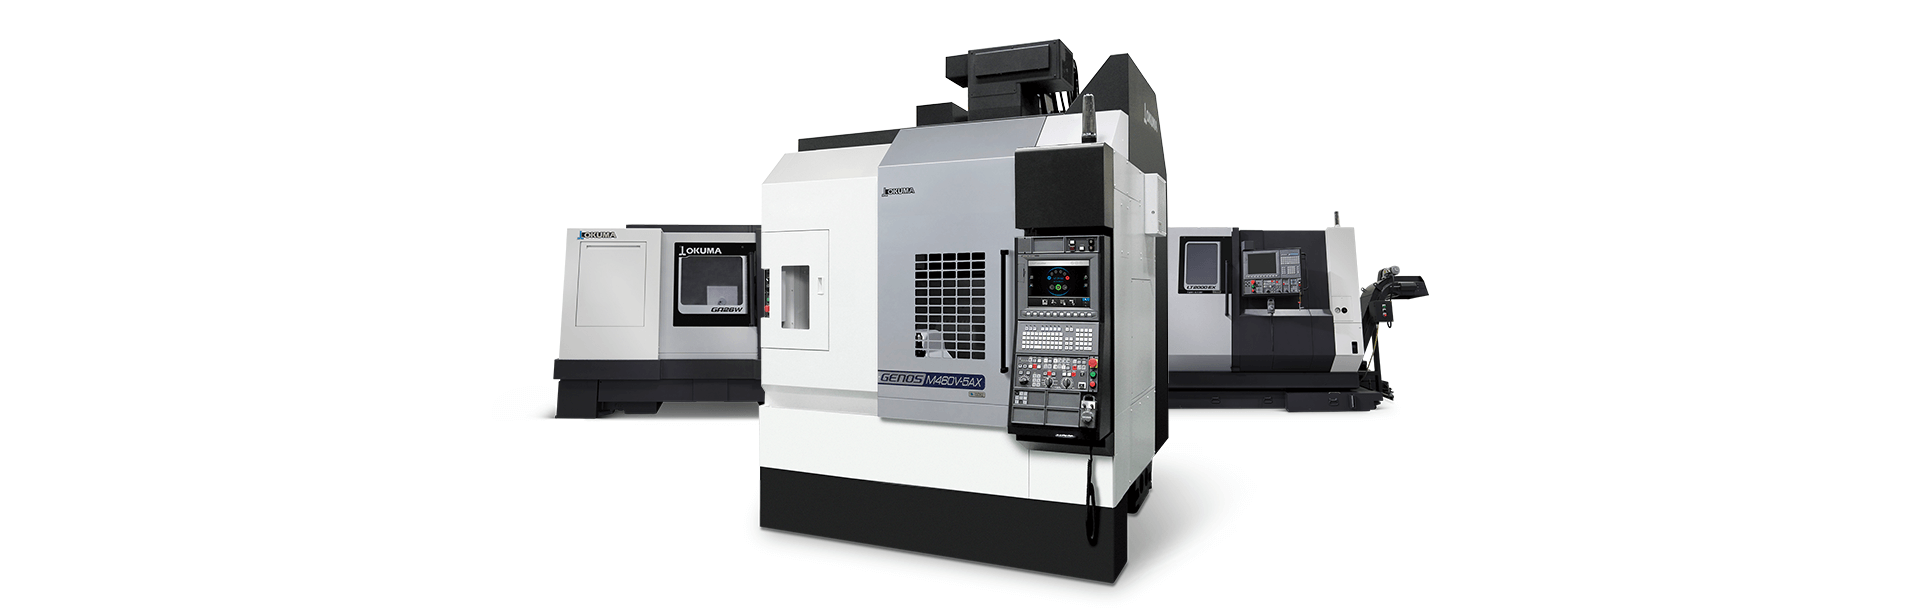 INVEST IN 2019 WITH OKUMA YEAR-END INCENTIVES